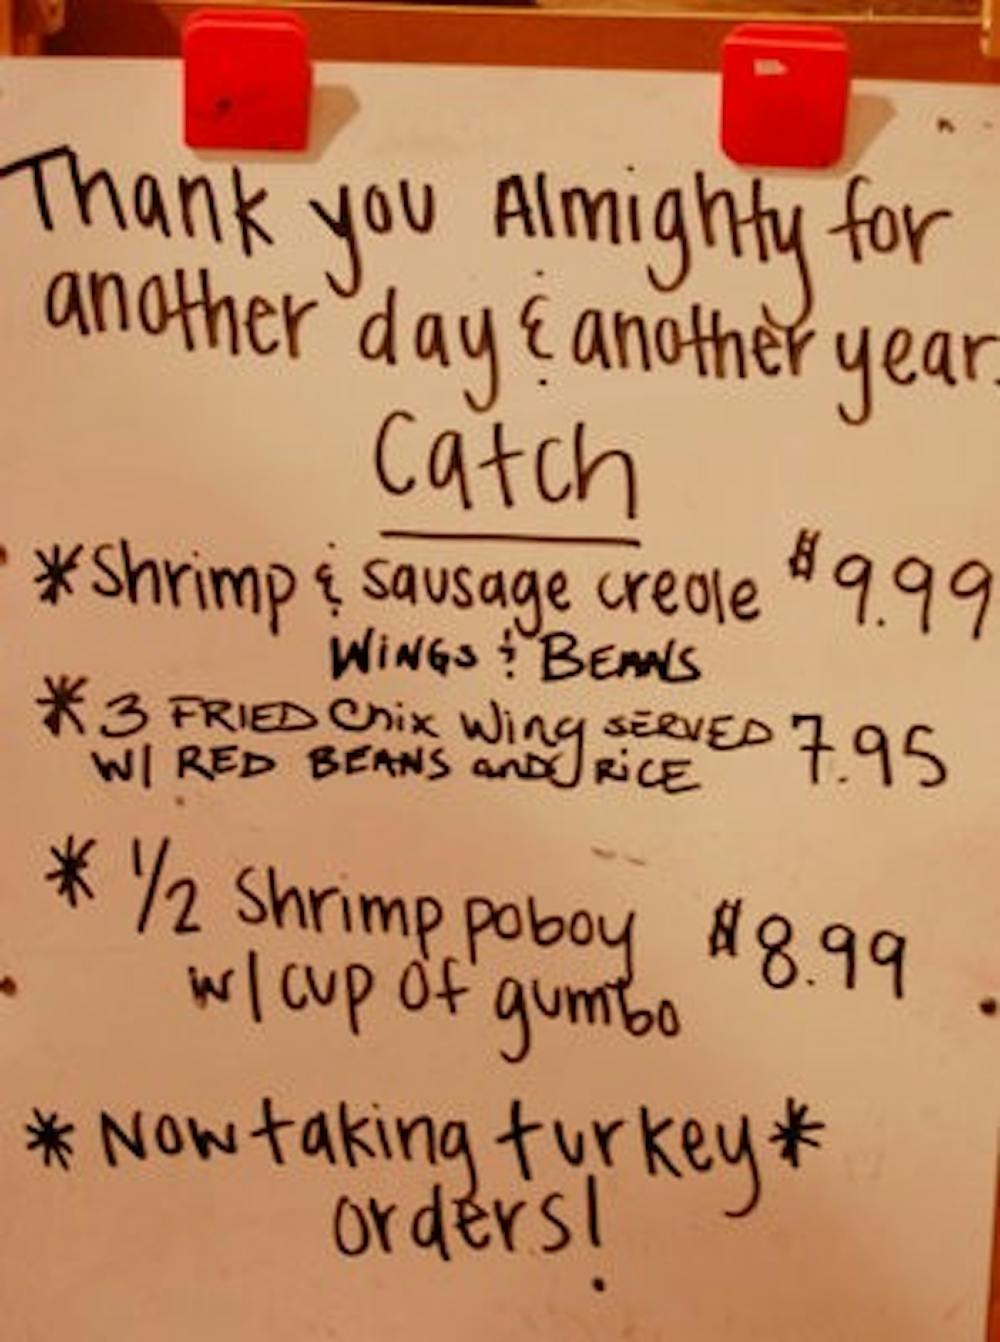 The Creole Shack menu displays the daily specials and a note to the power above for another year of business. (Charlie Timberlake / Assistant Photo Editor)